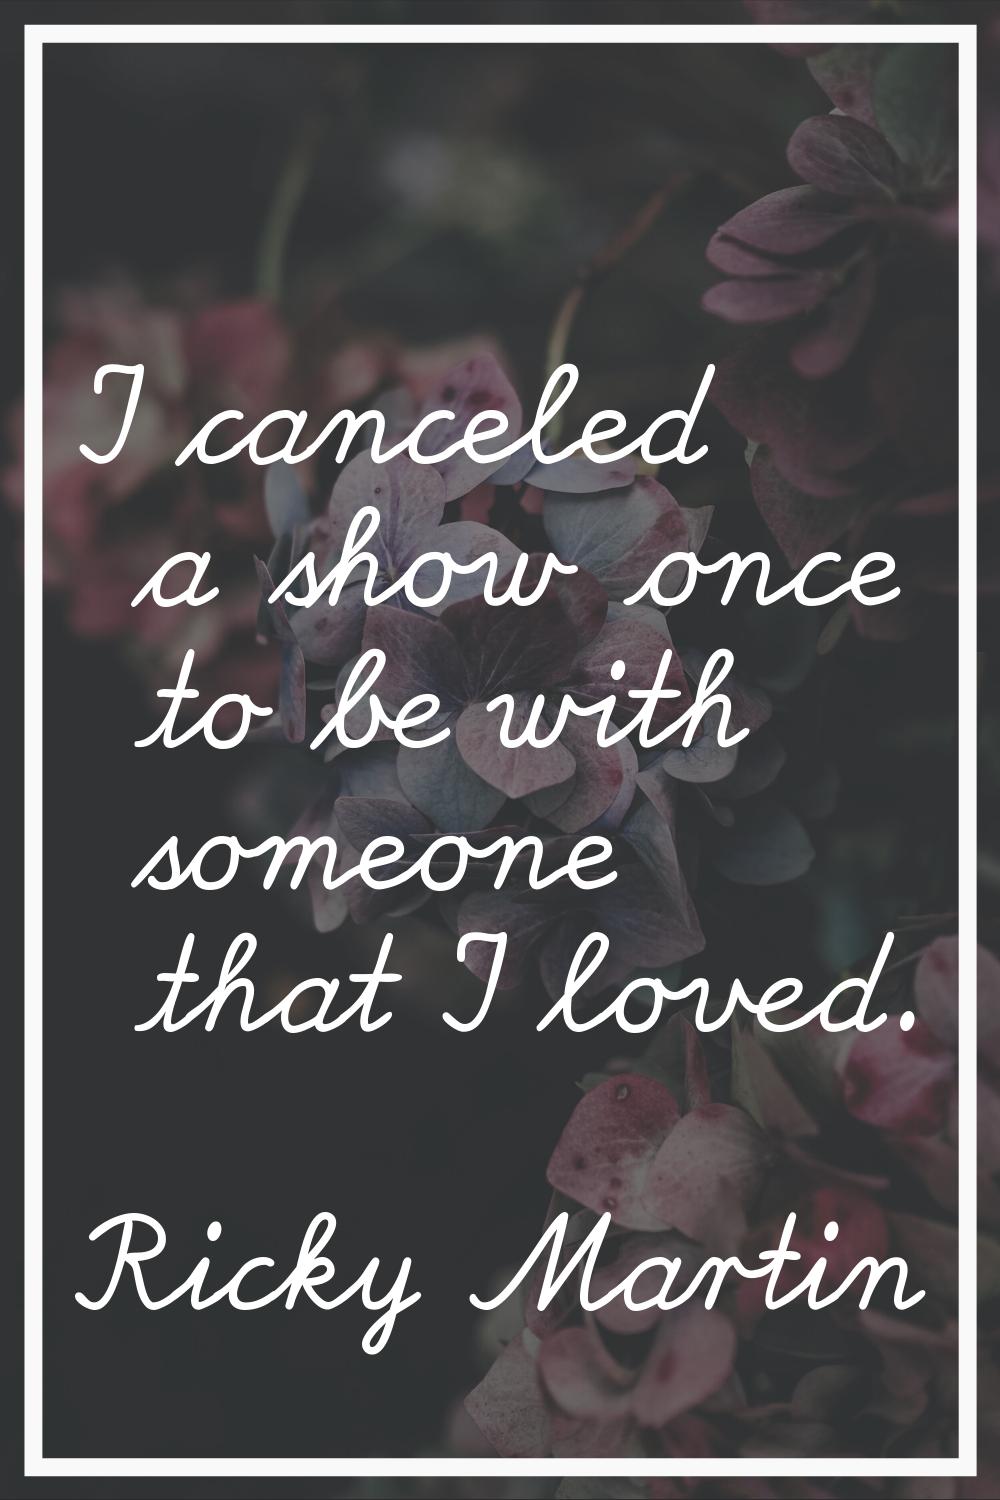 I canceled a show once to be with someone that I loved.